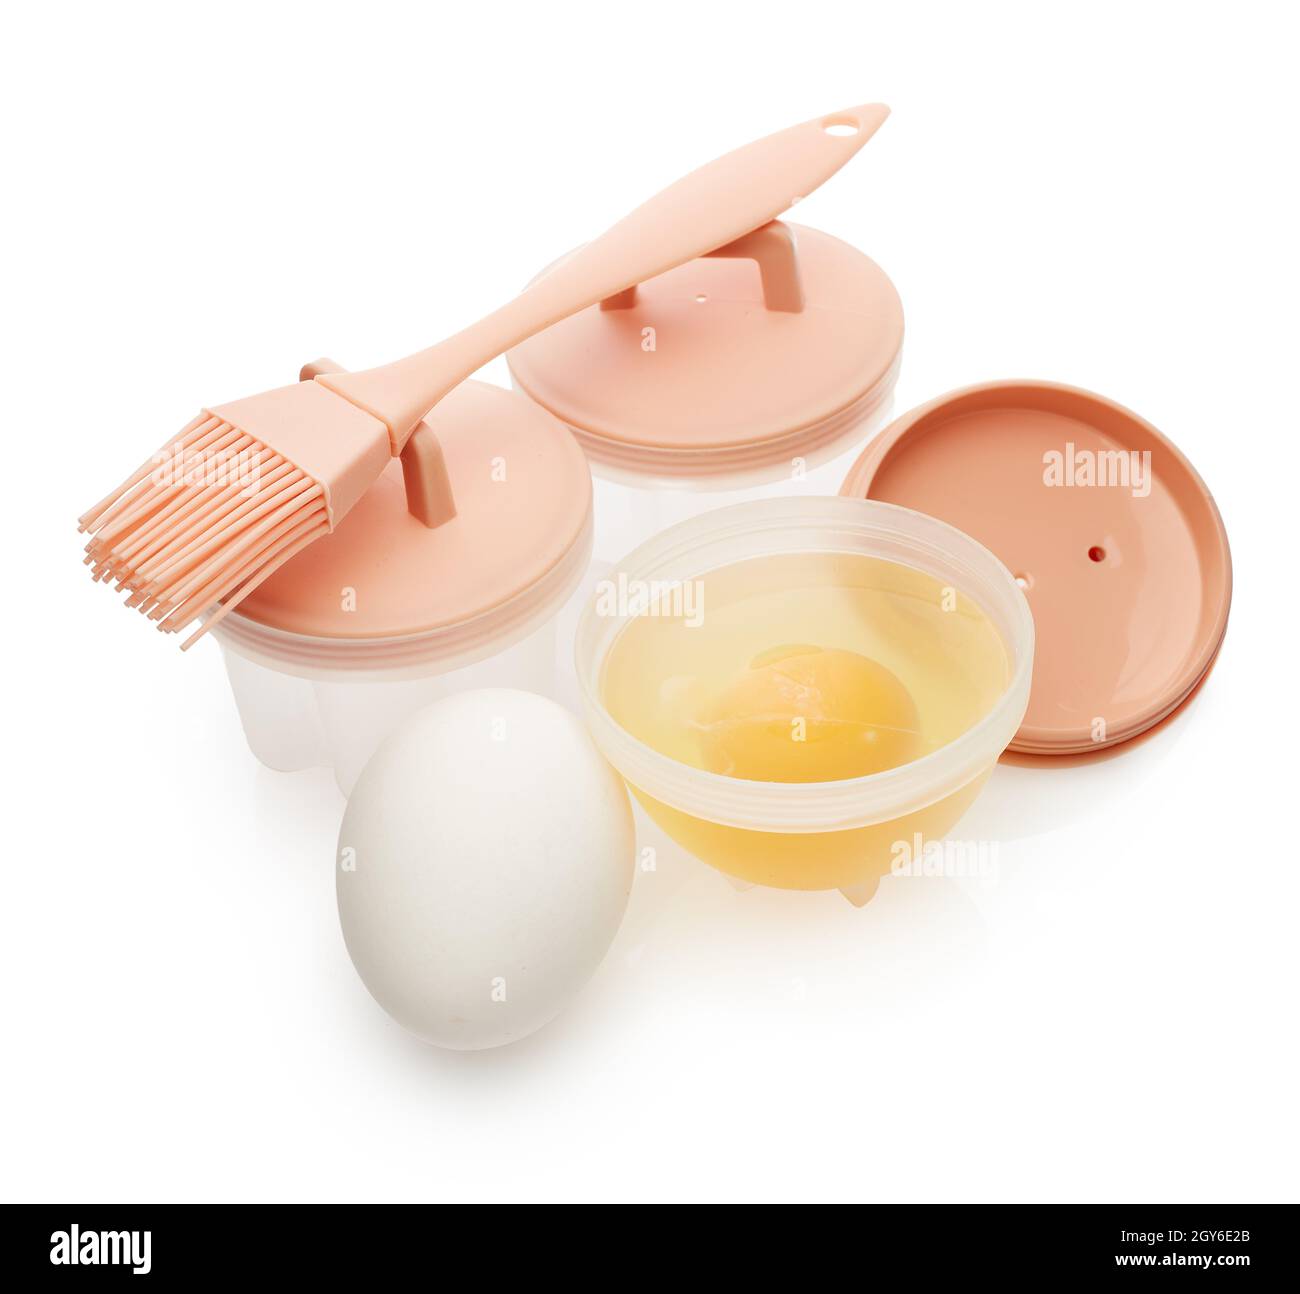 Set of heat resistant silicone molds for poached egg, basting brush and fresh raw eggs isolated on white background. Utensil for cooking. Poached egg. Stock Photo